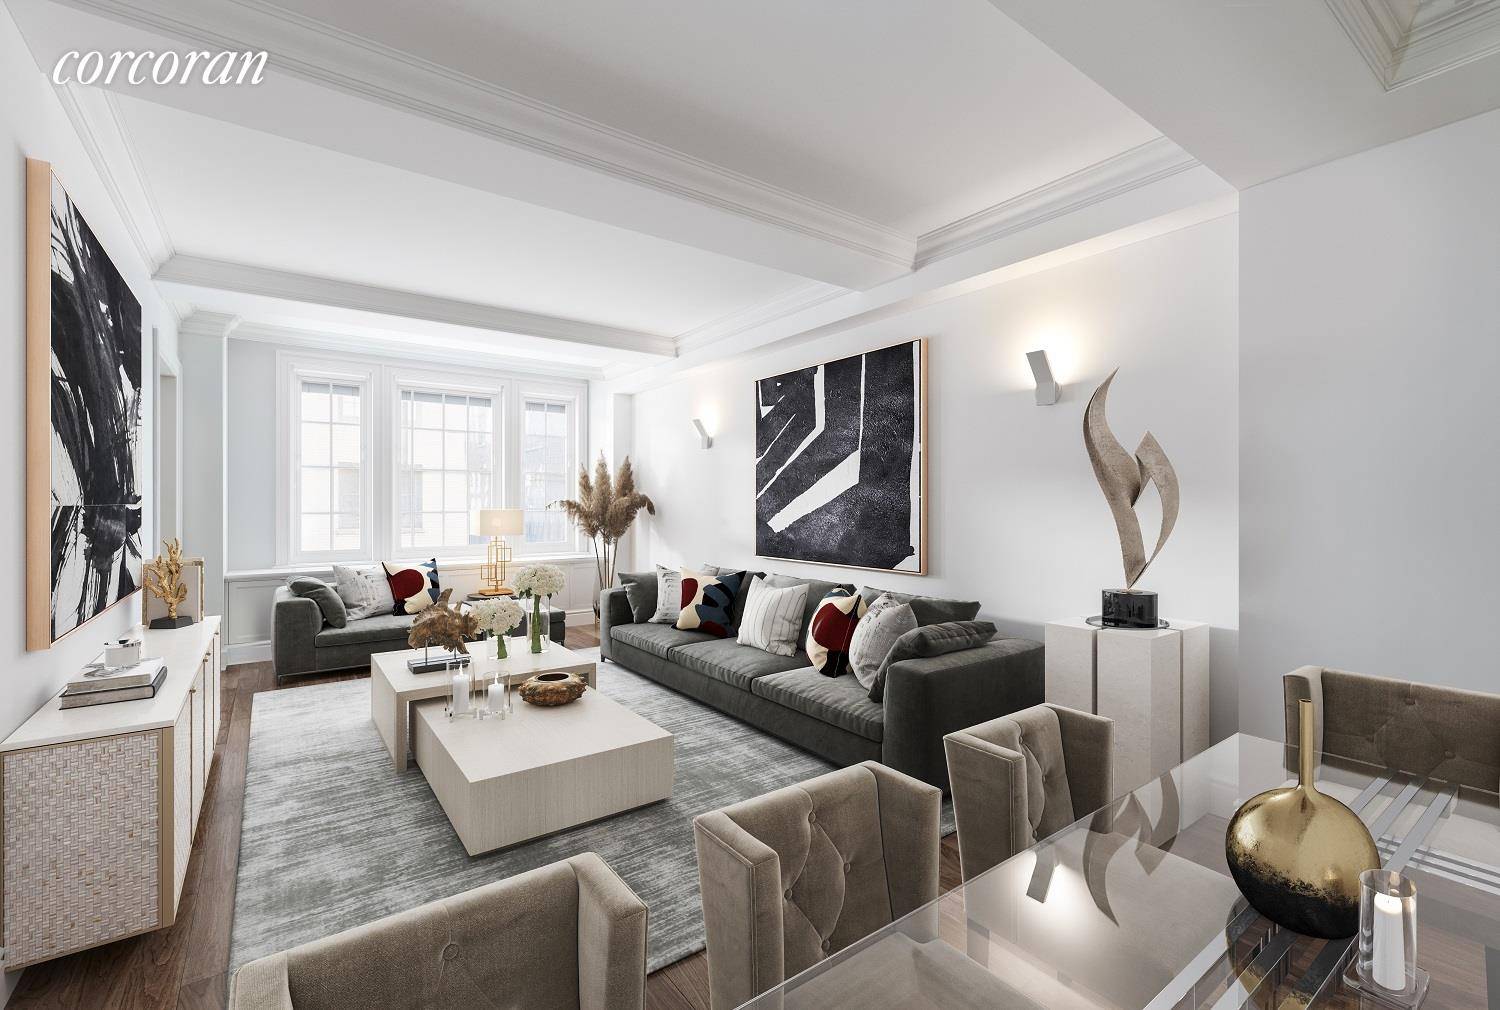 Devonshire HouseRarely available, pristine and elegant one bedroom condominium located in one of the most prestigious buildings in Greenwich Village.